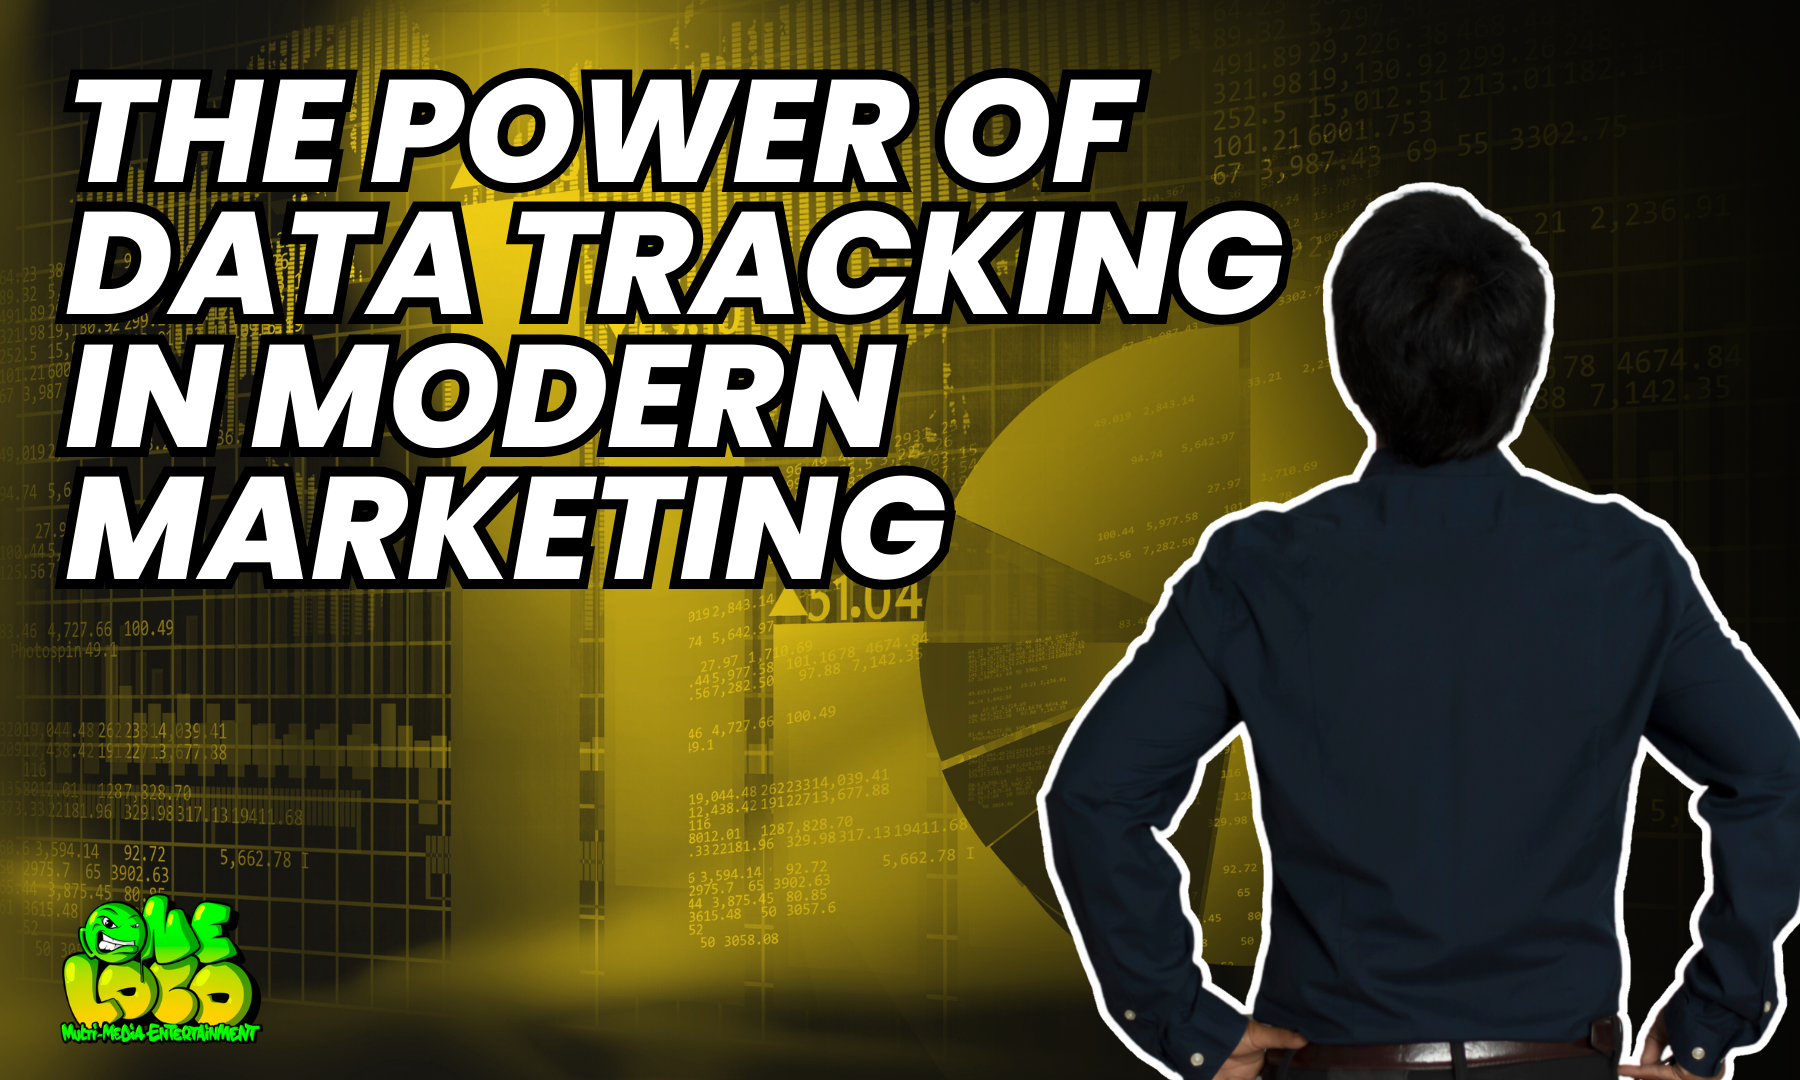 The Power of Data Tracking in Modern Marketing